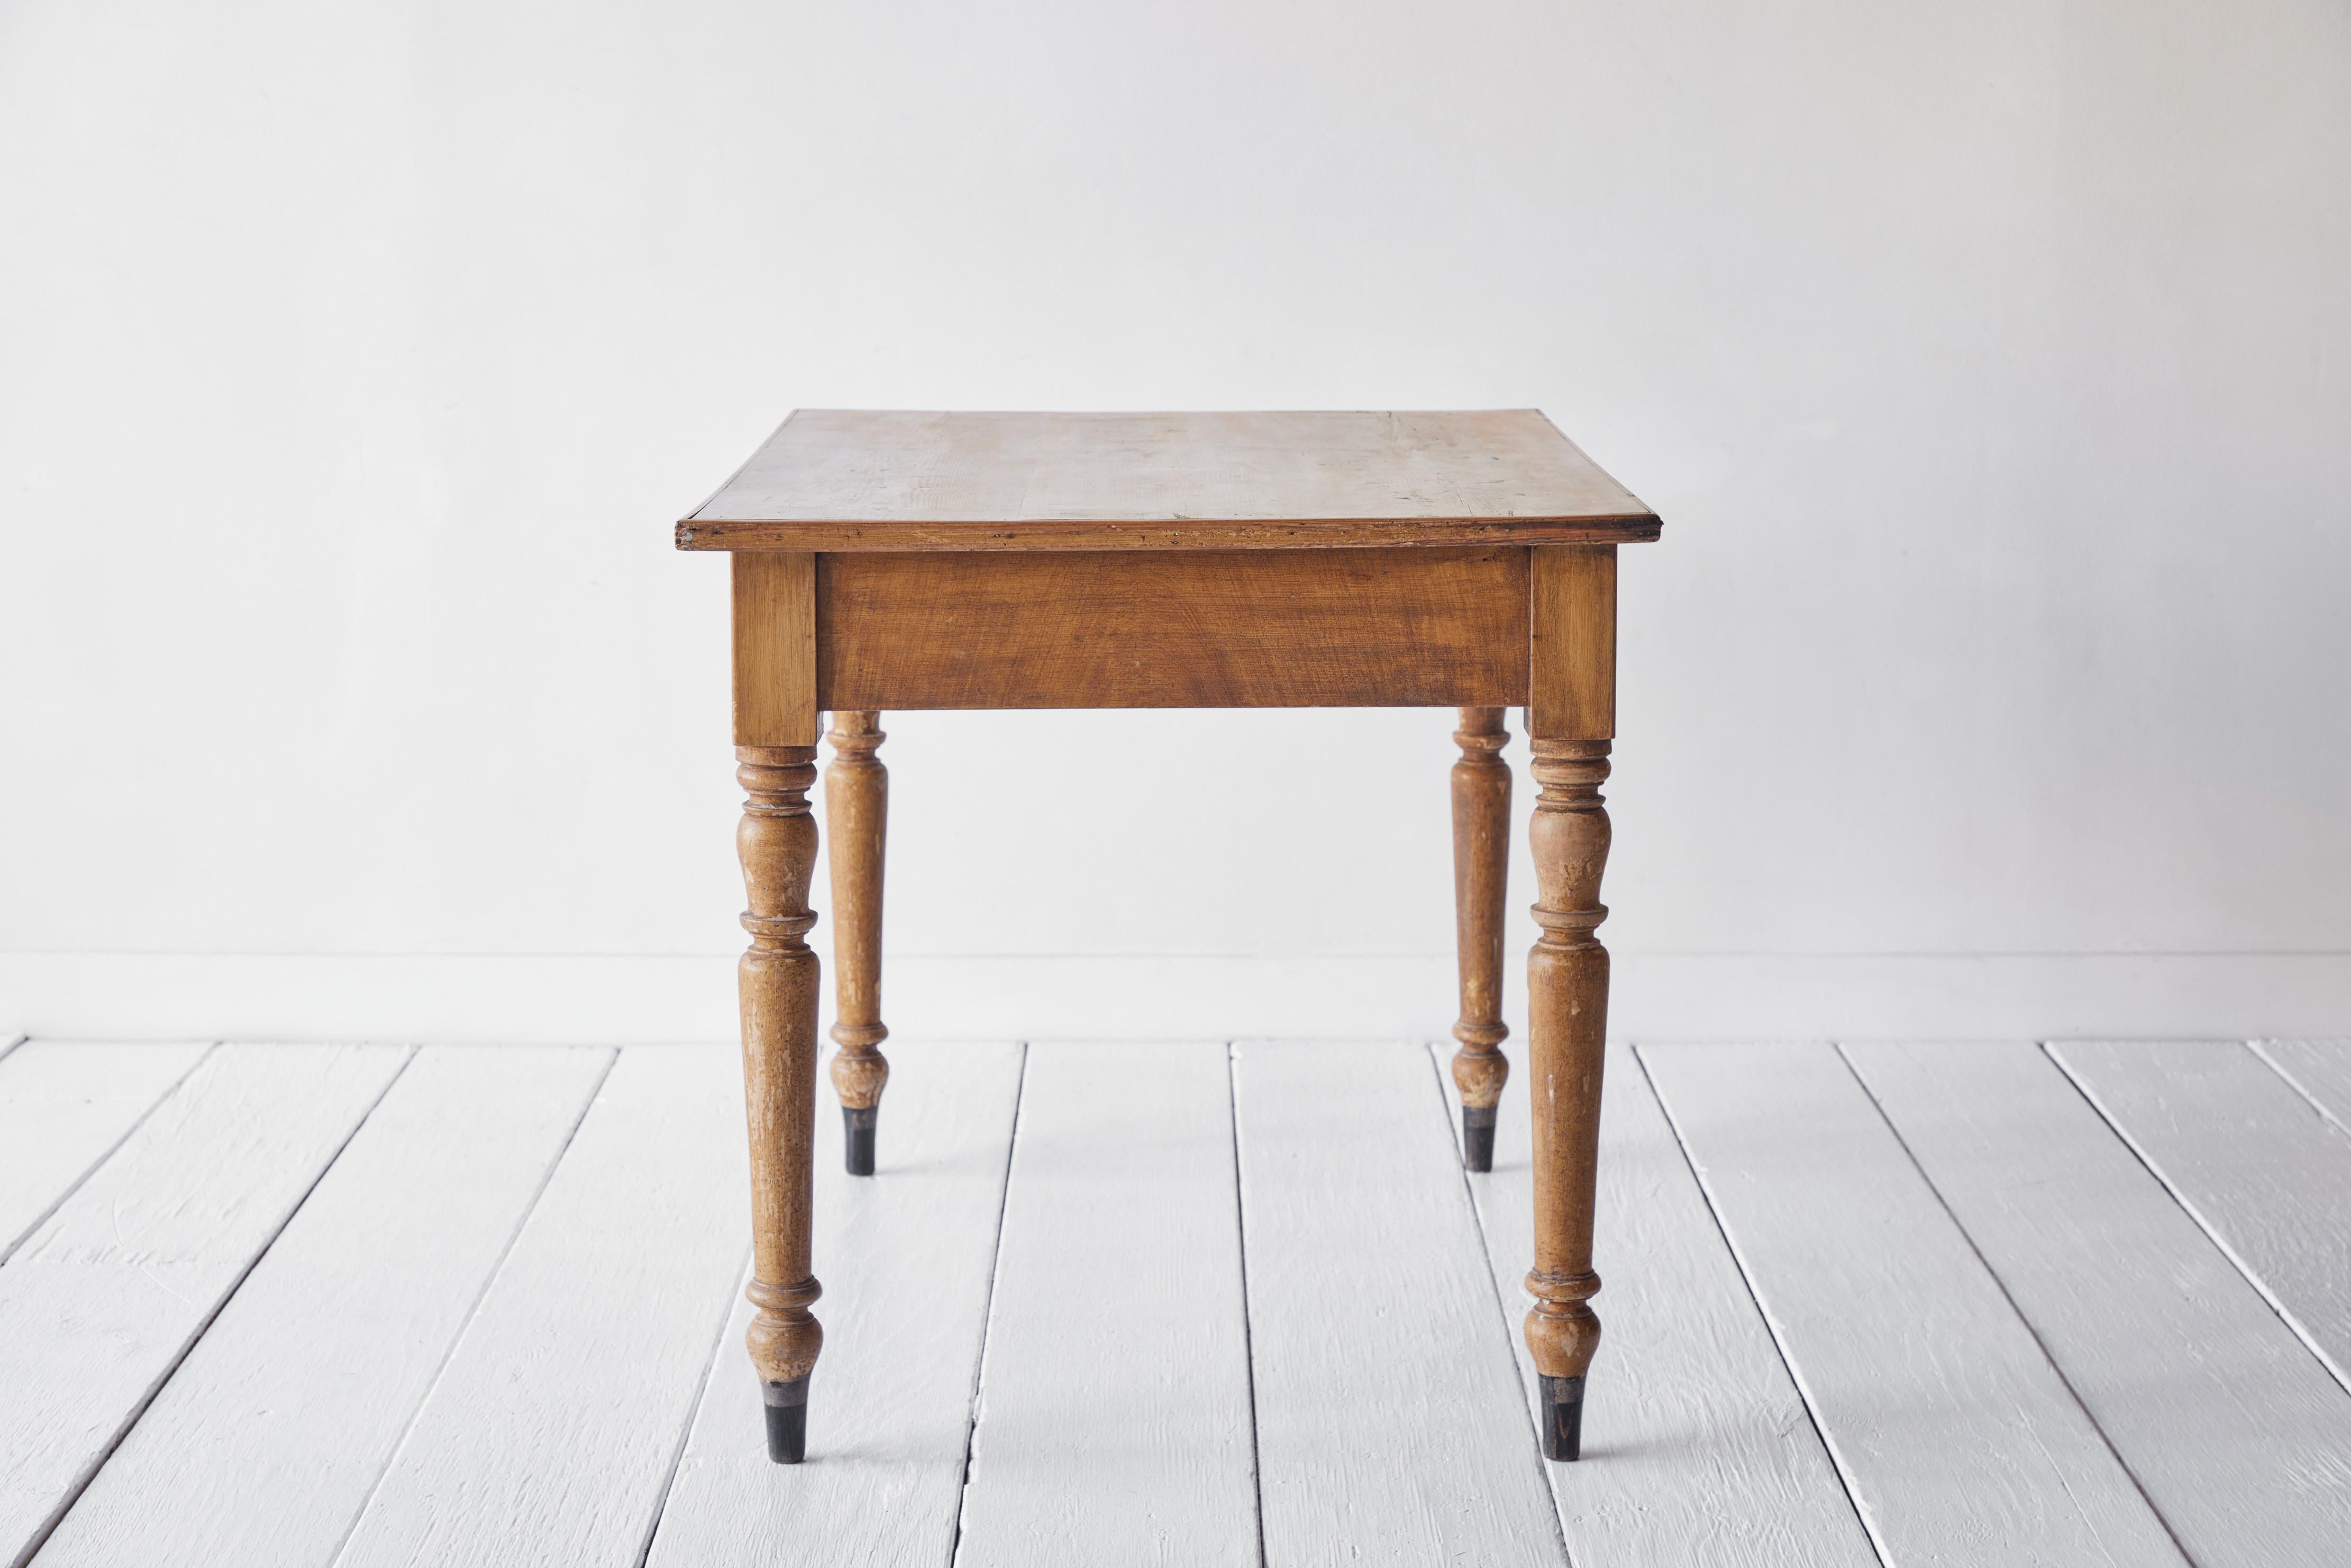 Oak Rustic Early American Table with Single Drawer